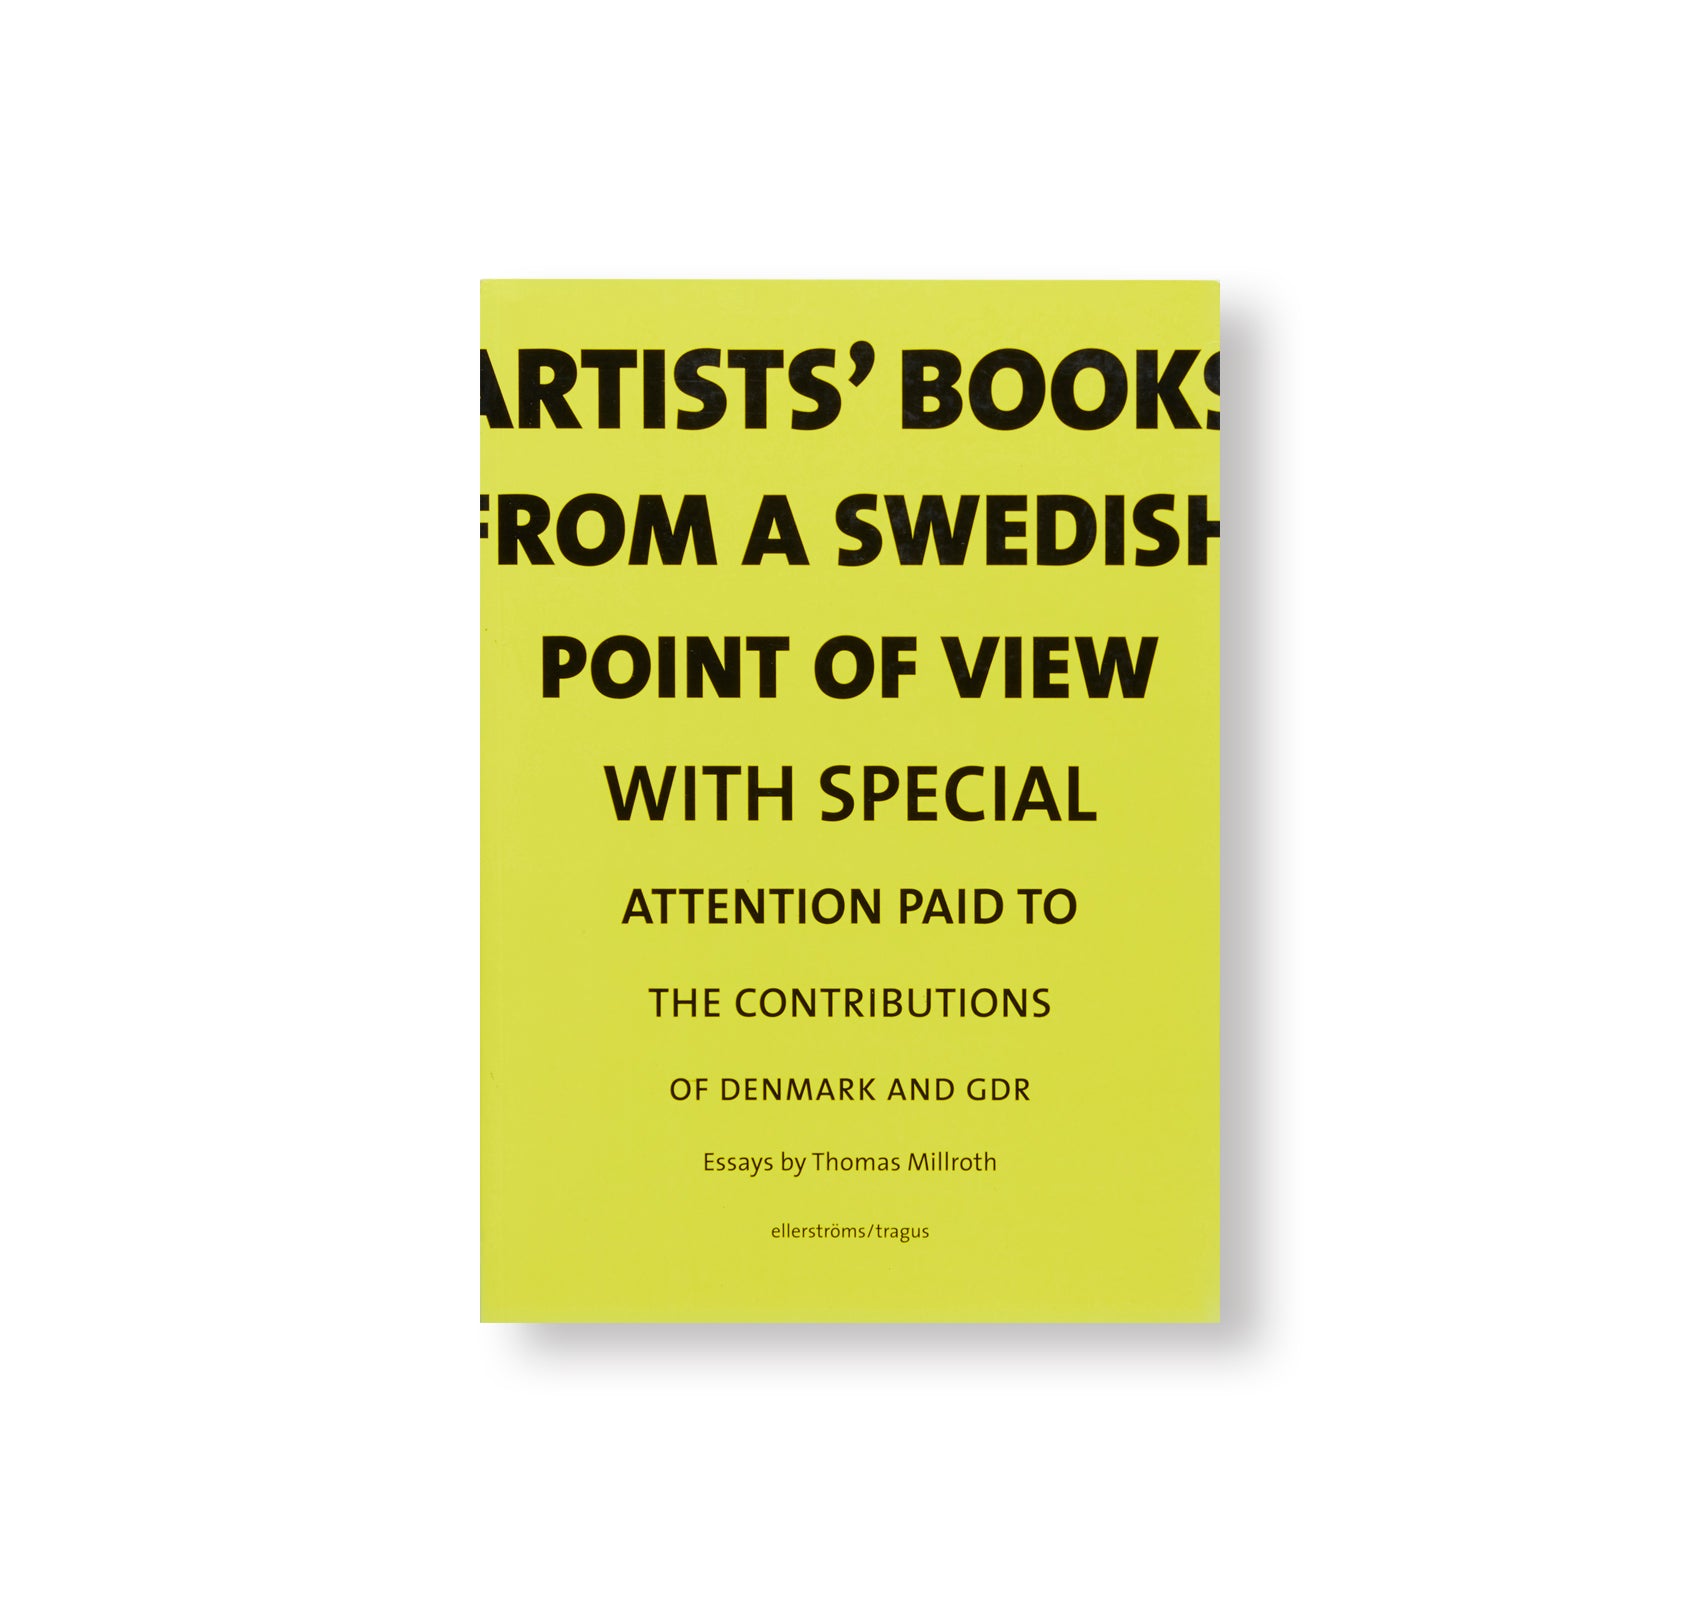 ARTISTS BOOKS FROM A SWEDISH POINT OF VIEW WITH SPECIAL WITH SPECIAL ATTENTION PAID TO THE CONTRIBUTIONS OF DENMARK AND GDR